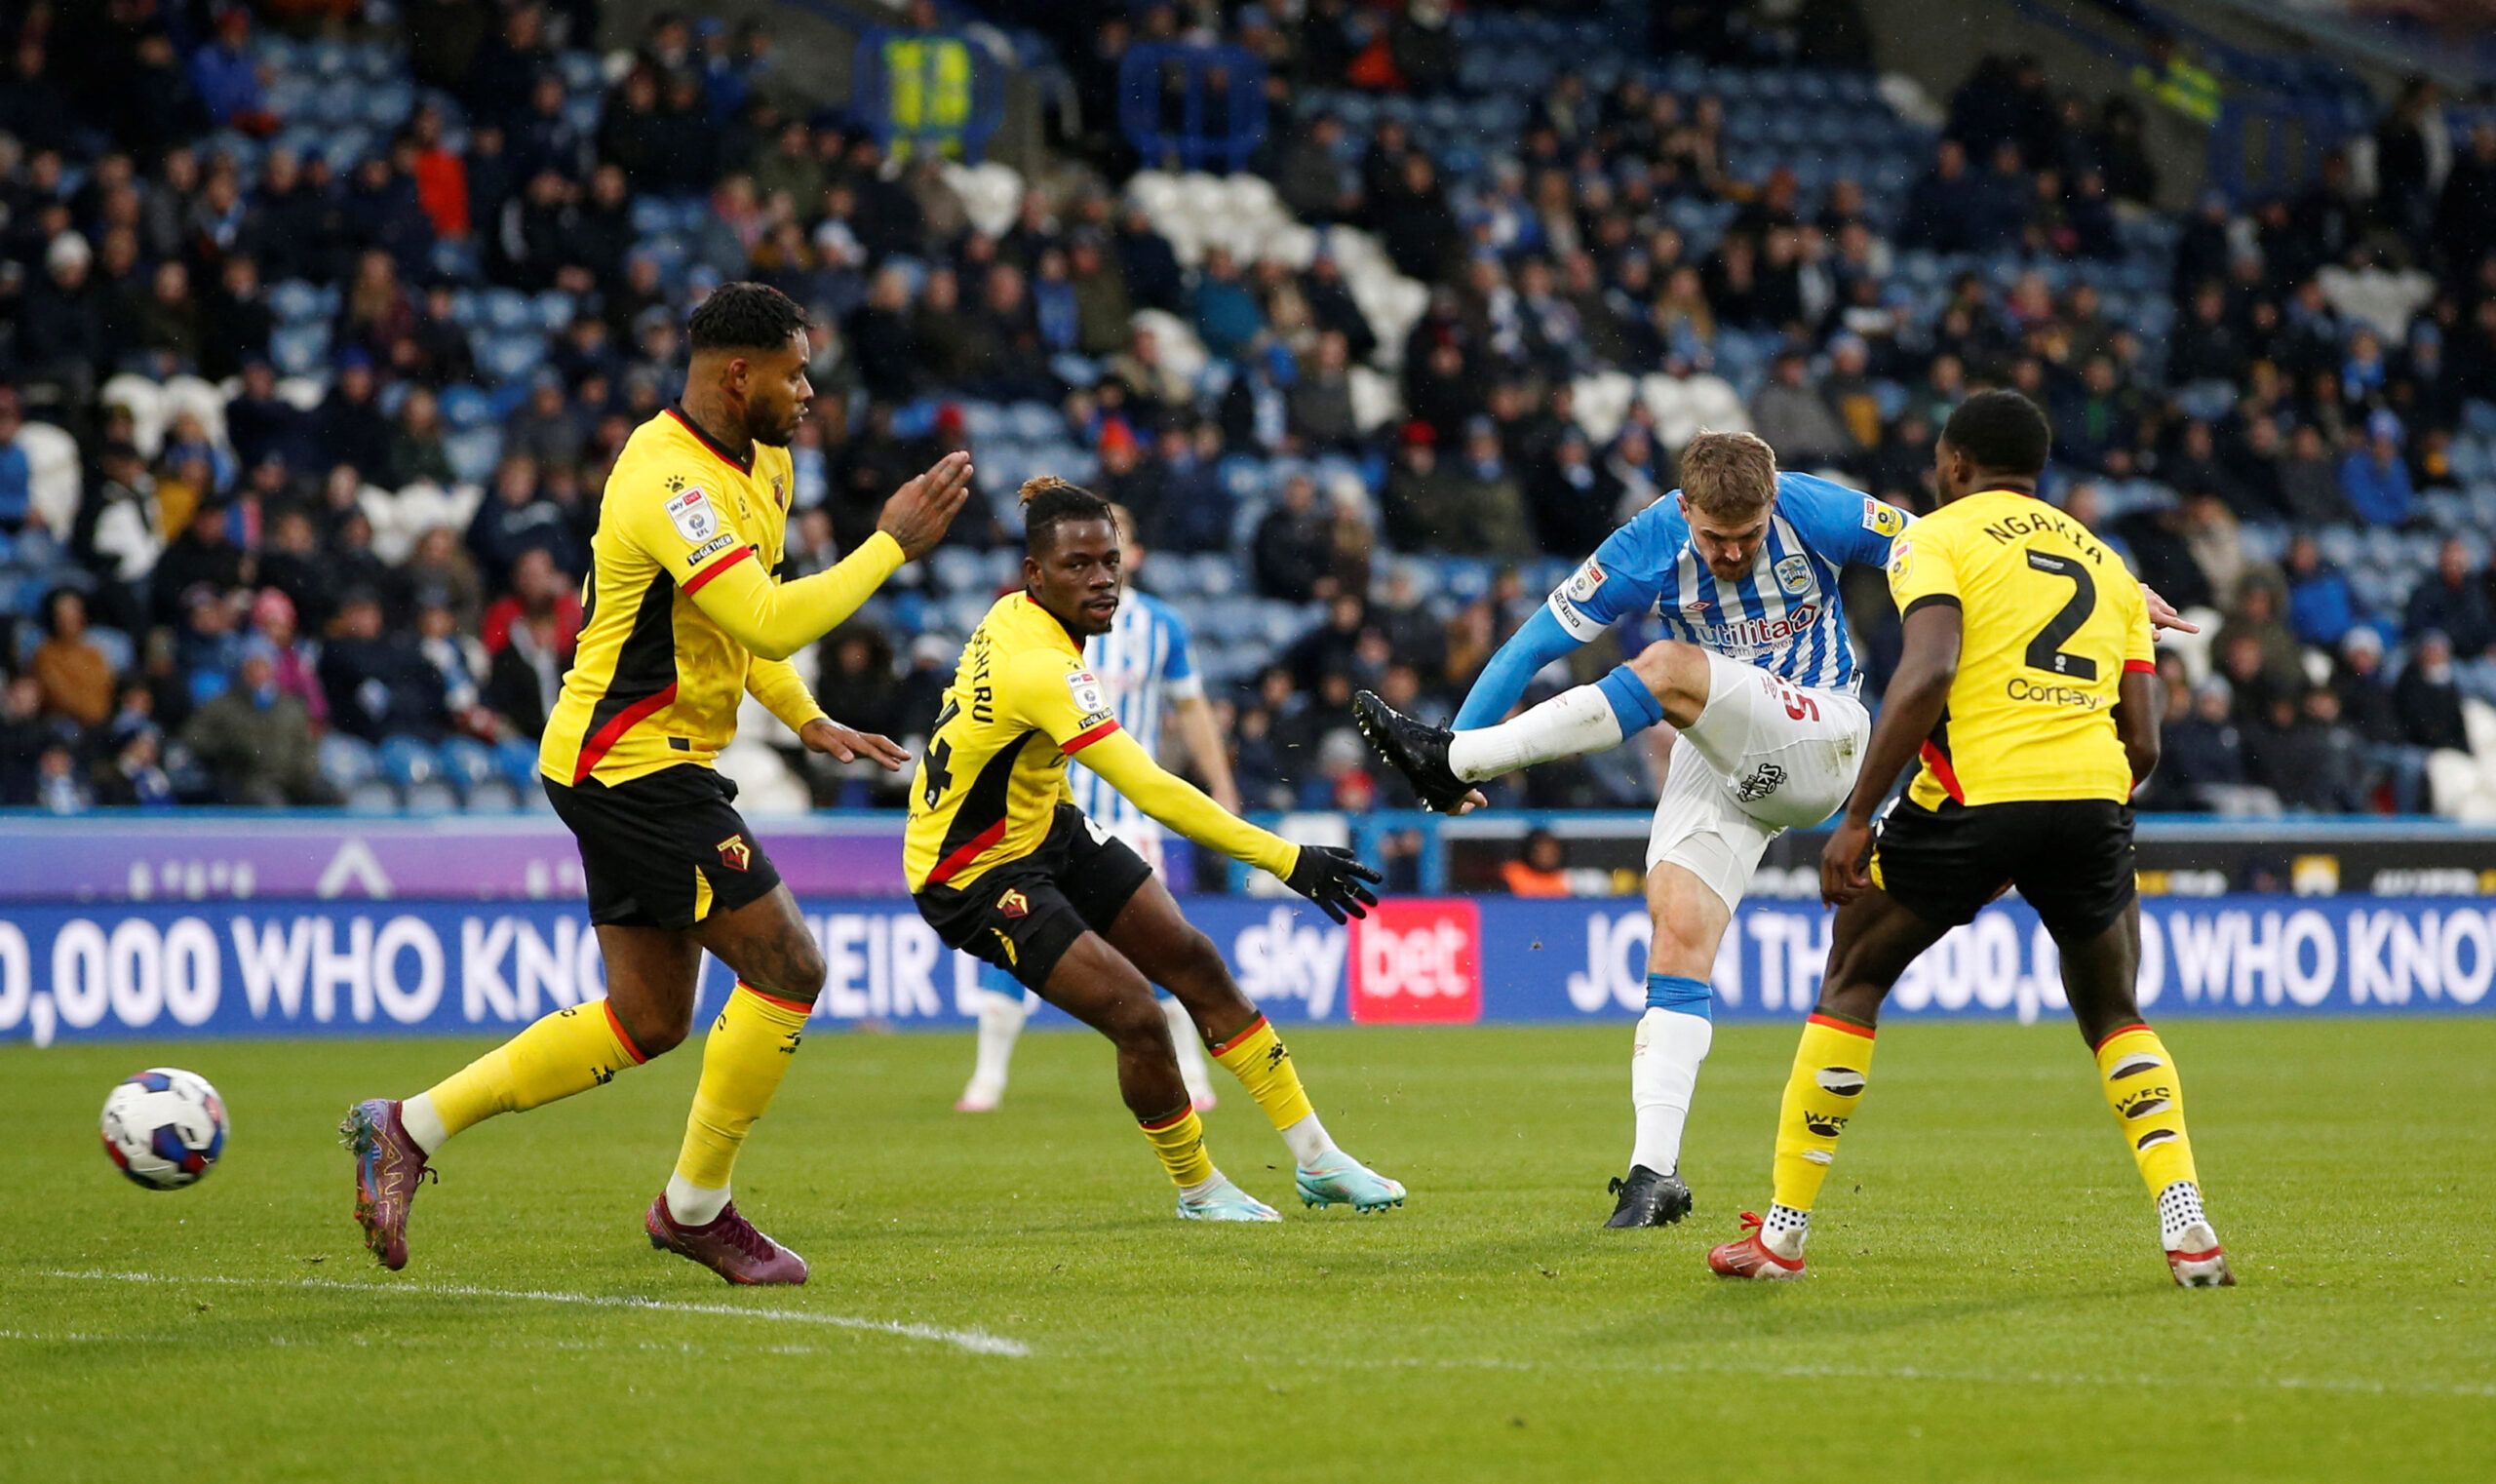 Soccer Football - Championship - Huddersfield Town v Watford - John Smith's Stadium, Huddersfield, Britain - December 17, 2022 Huddersfield Town's Danny Ward shoots at goal  Action Images/Ed Sykes  EDITORIAL USE ONLY. No use with unauthorized audio, video, data, fixture lists, club/league logos or 